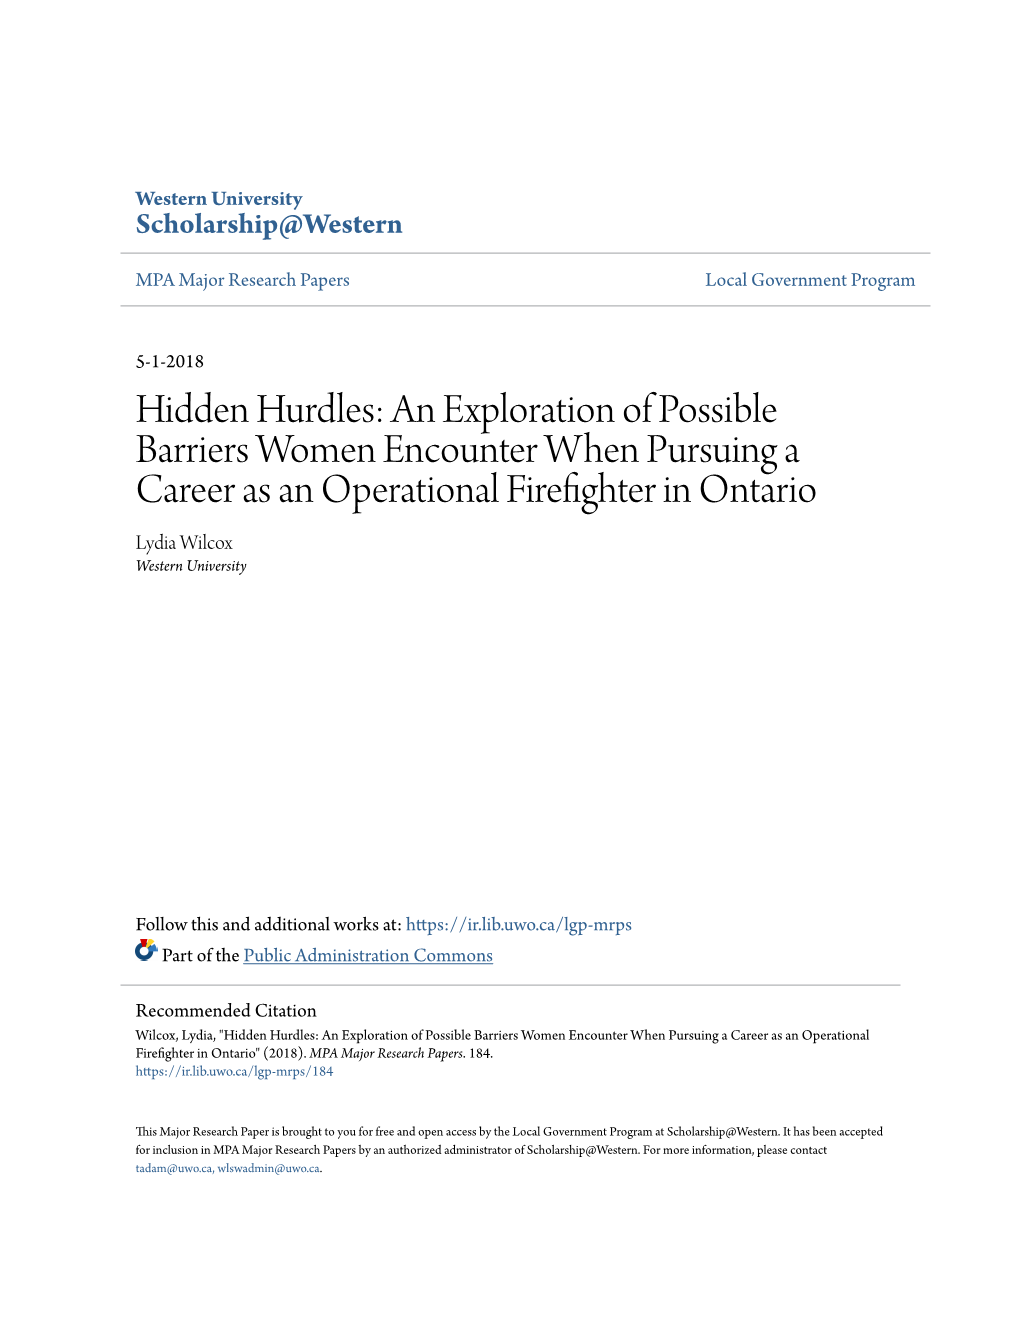 An Exploration of Possible Barriers Women Encounter When Pursuing a Career As an Operational Firefighter in Ontario Lydia Wilcox Western University